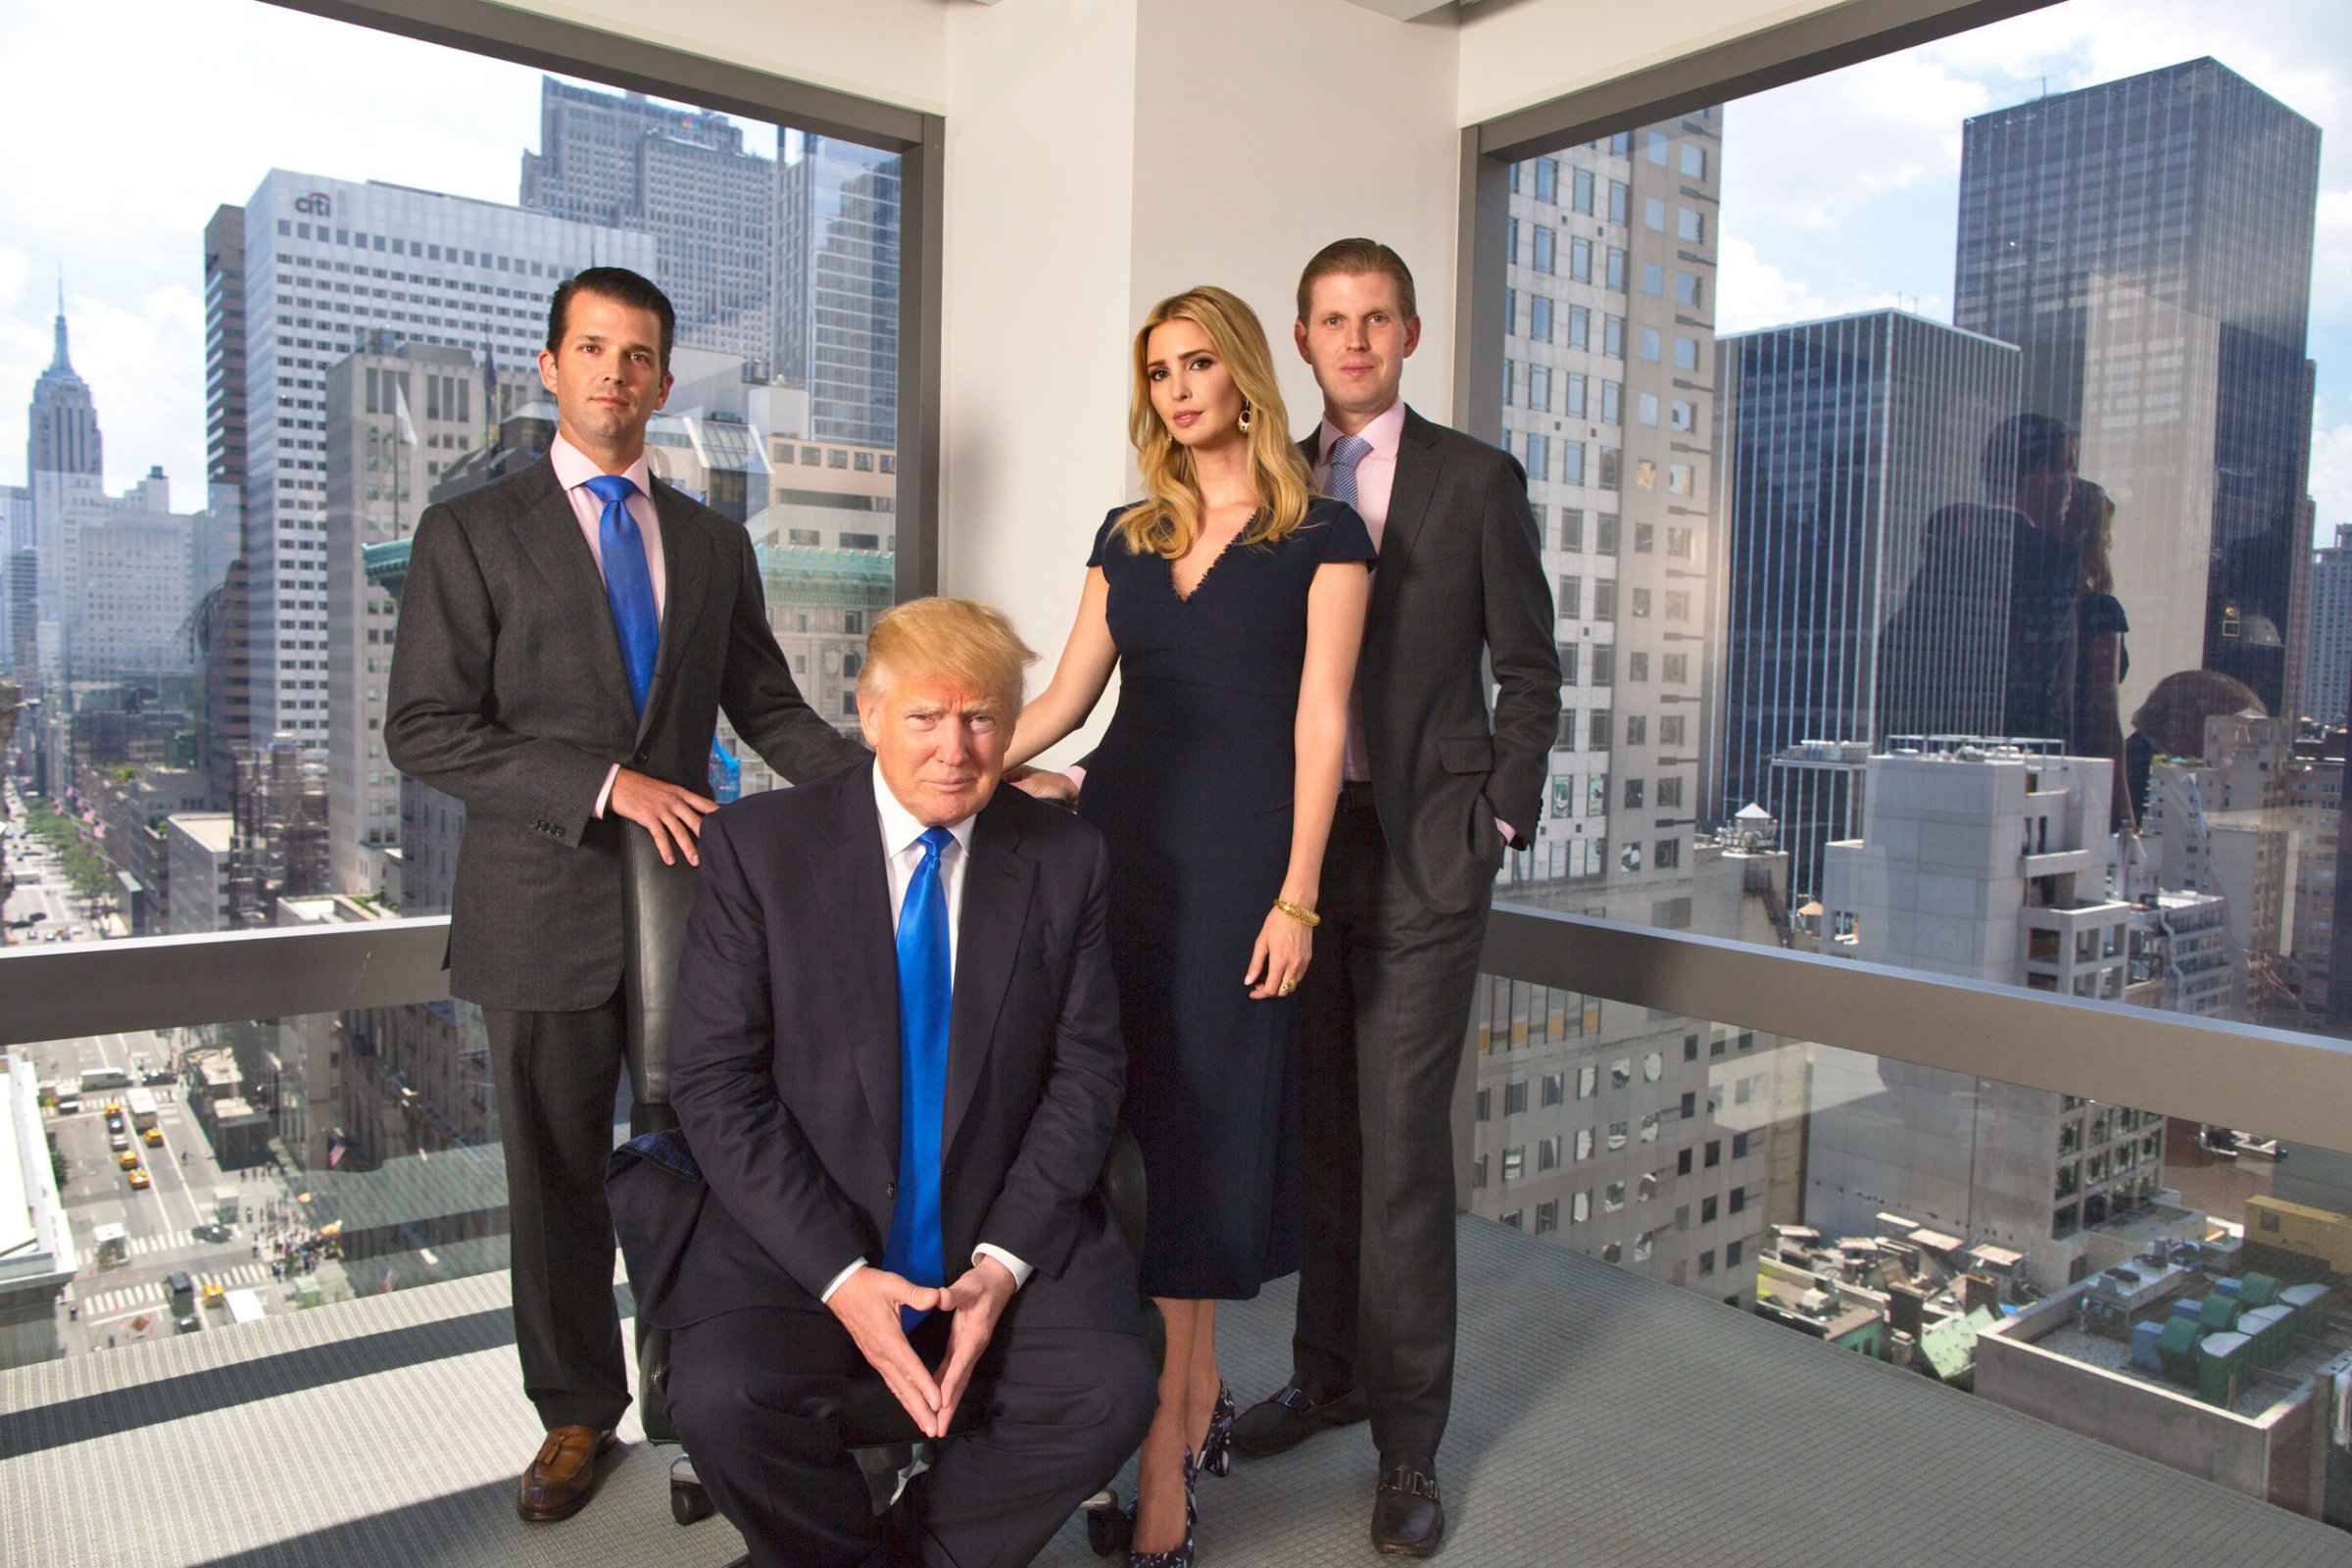 From left: Donald Jr., Ivanka and Eric Trump with their father on July 6 at Trump Tower in New York City